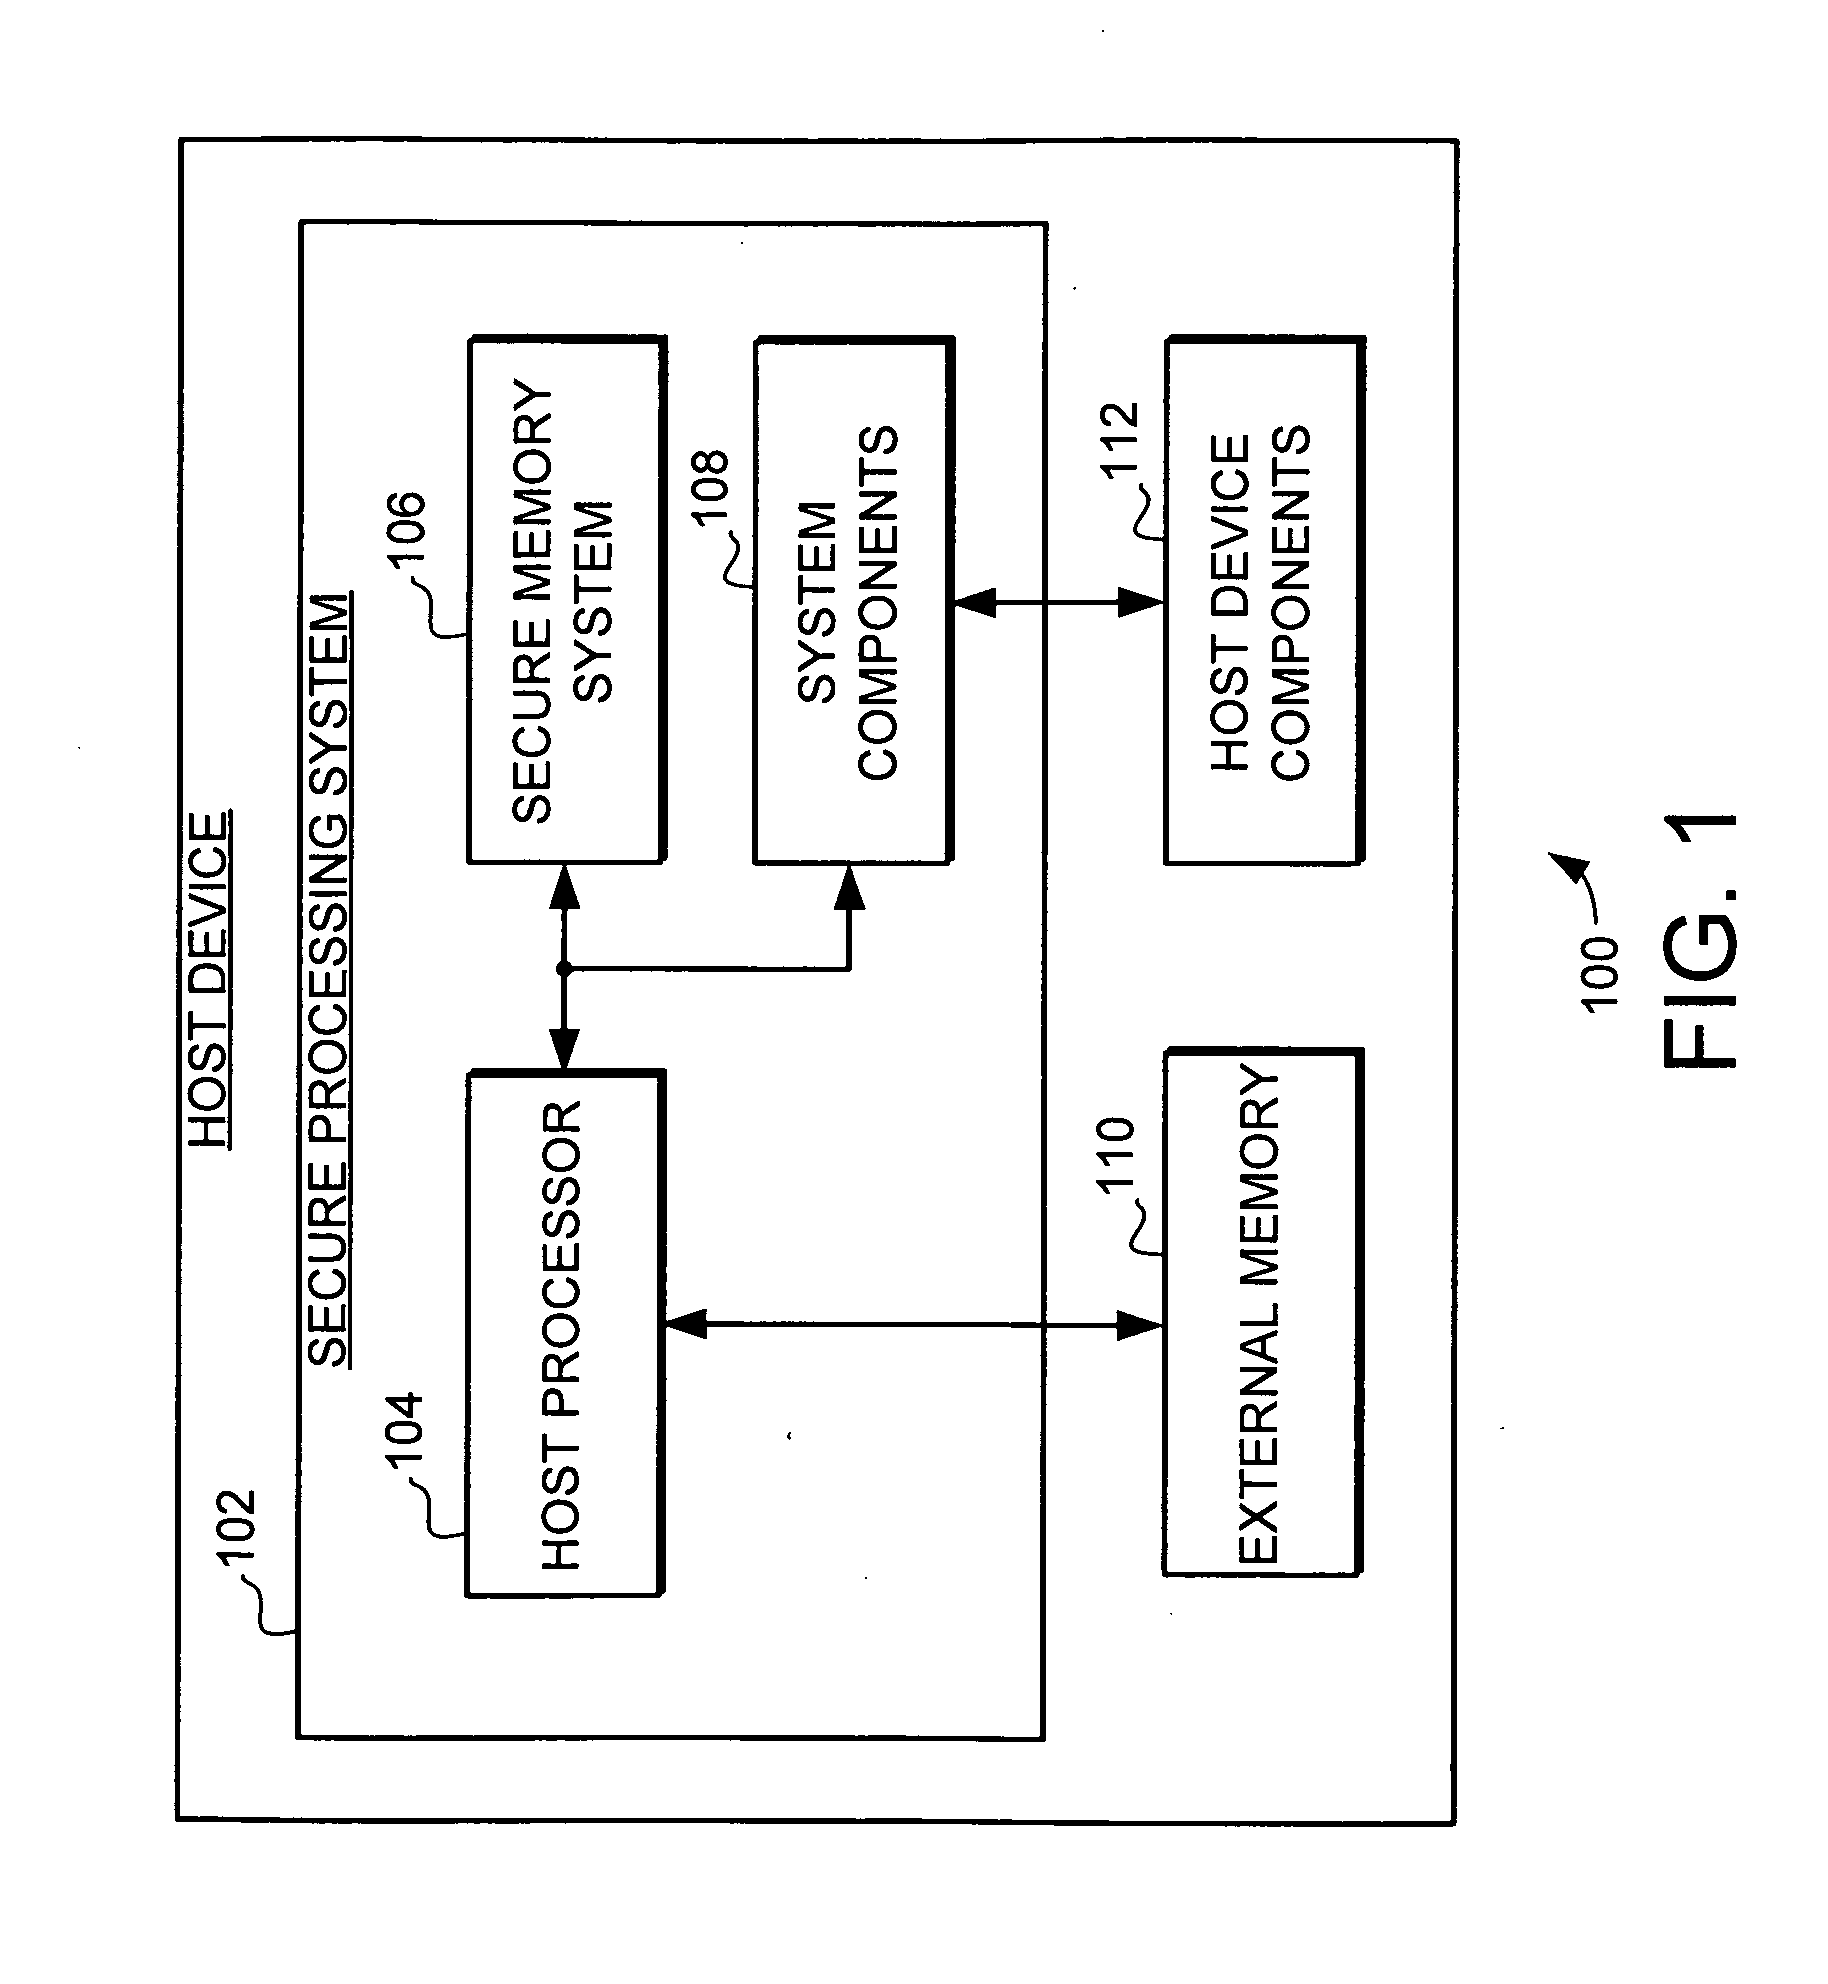 Multiple key security and method for electronic devices